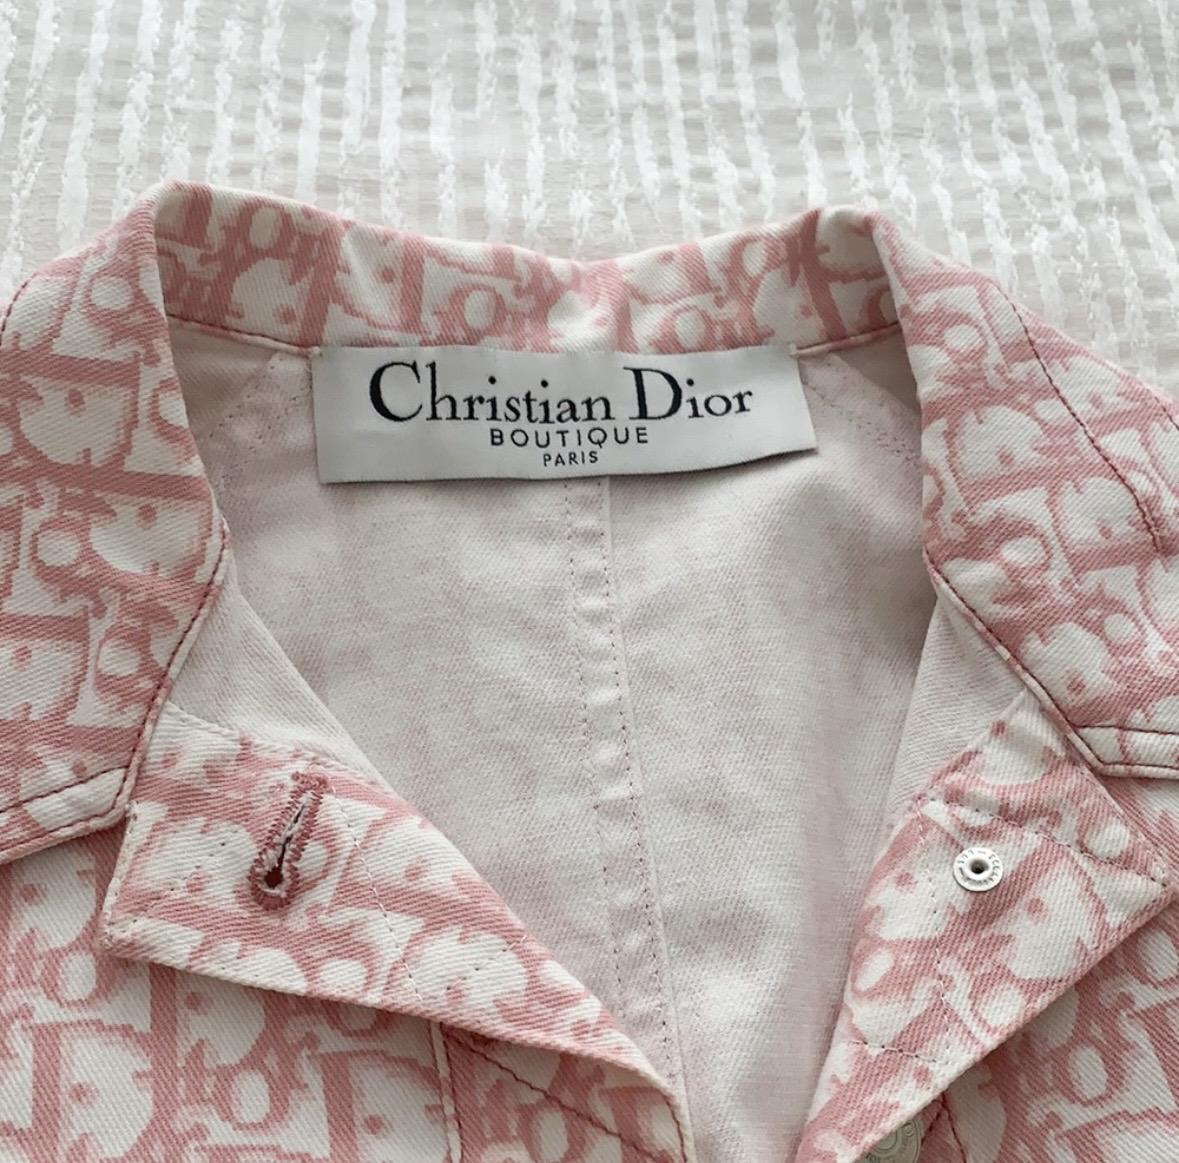 Christian Dior by John Galliano 2004 Girly monogram jacket  In Excellent Condition For Sale In Annandale, VA